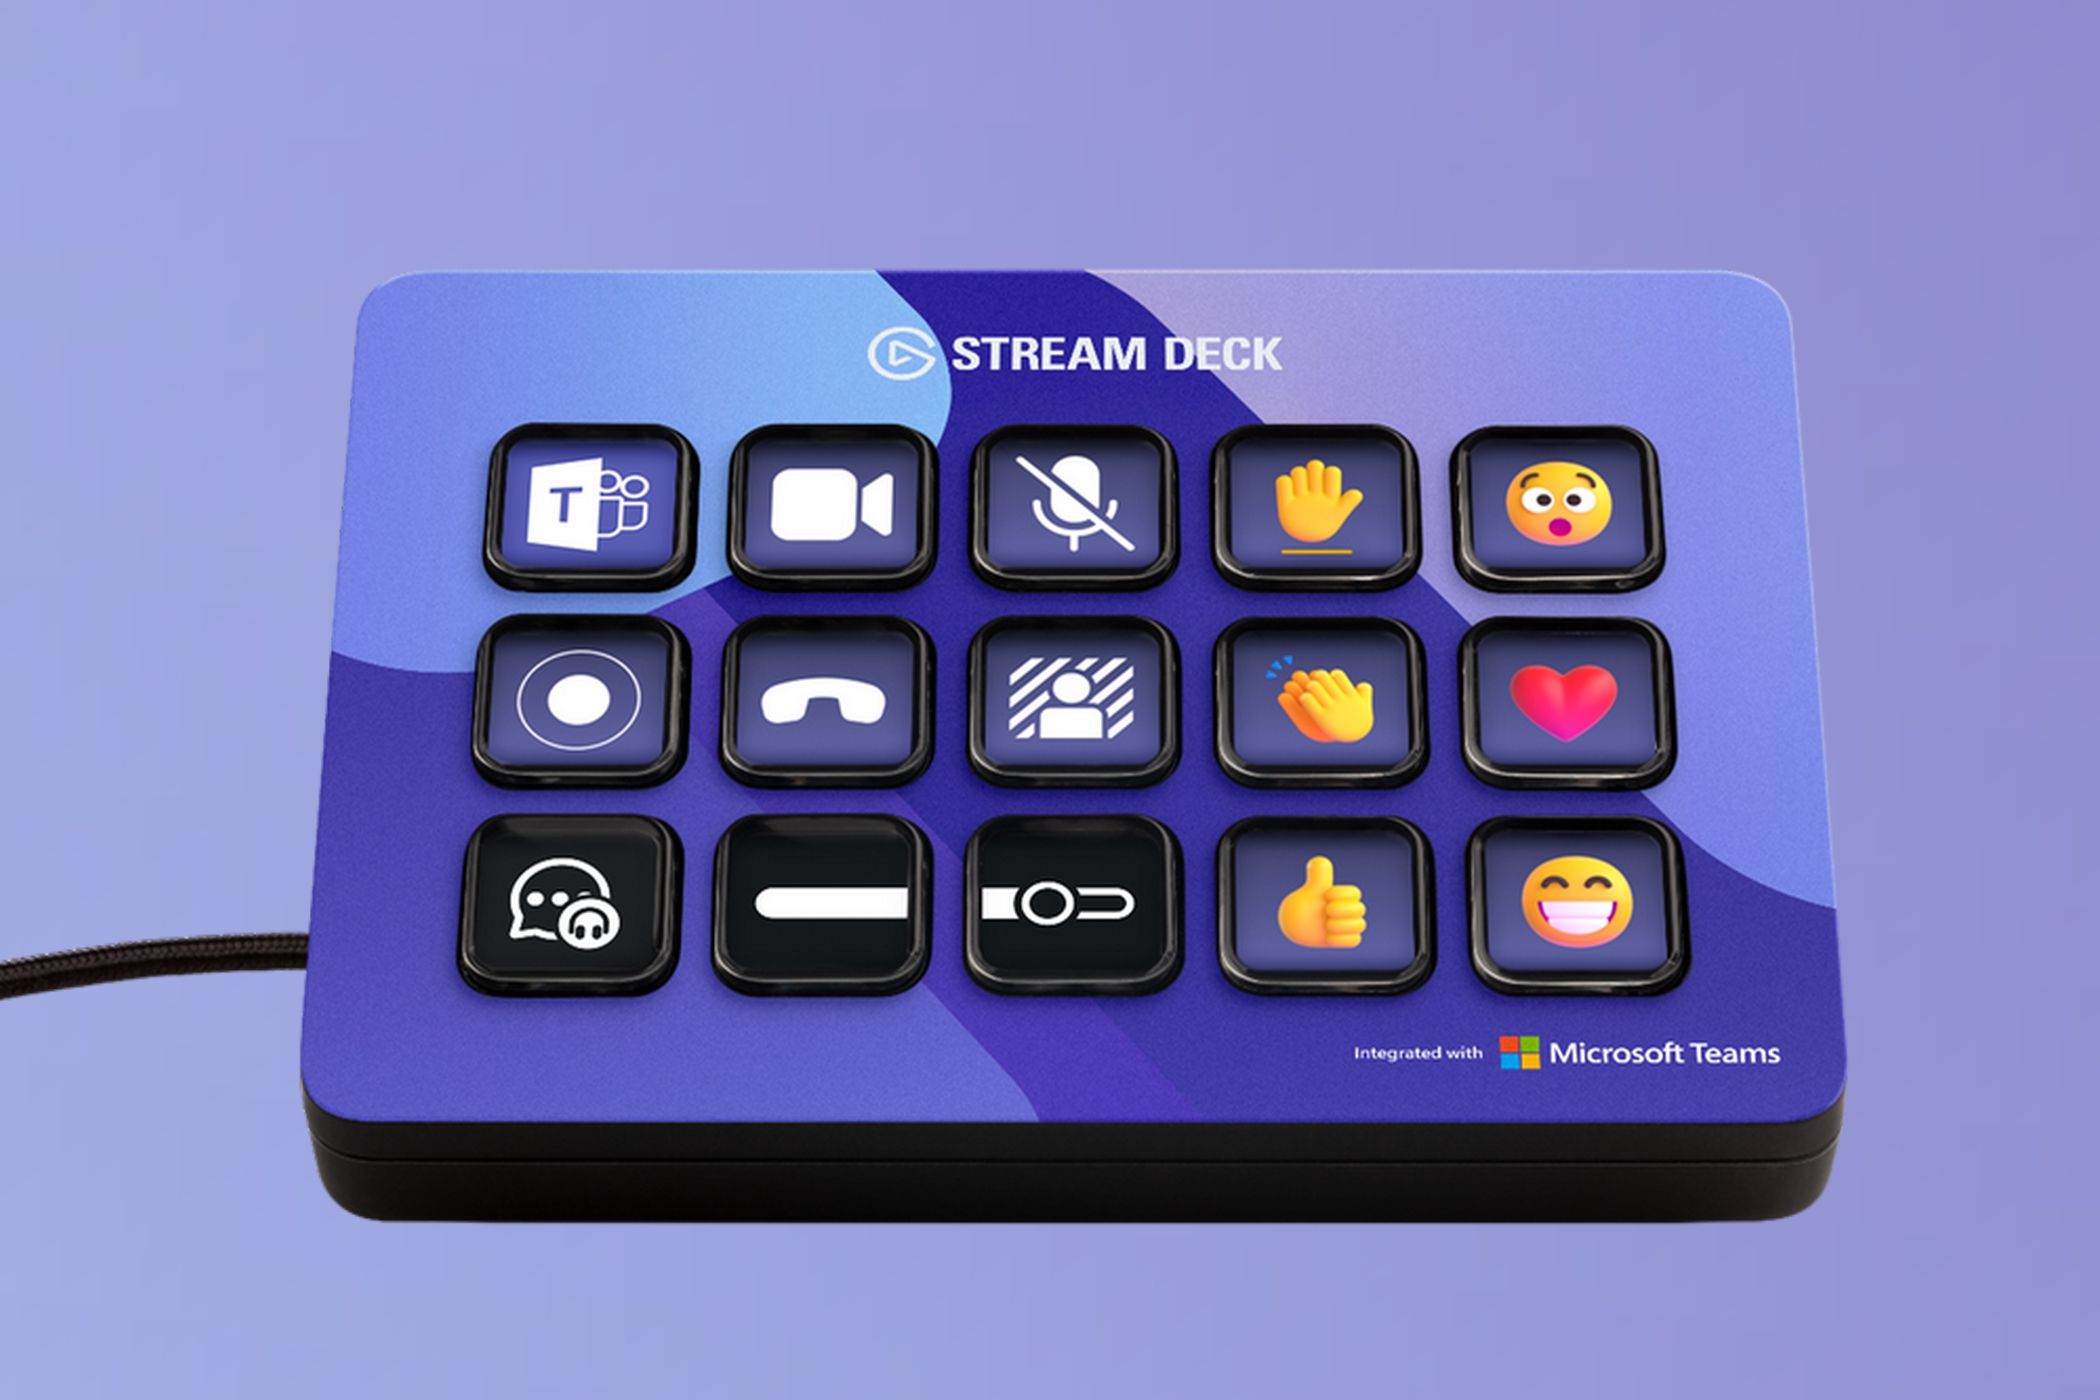 You can now use the Elgato Stream Deck to control your Microsoft Teams  meetings